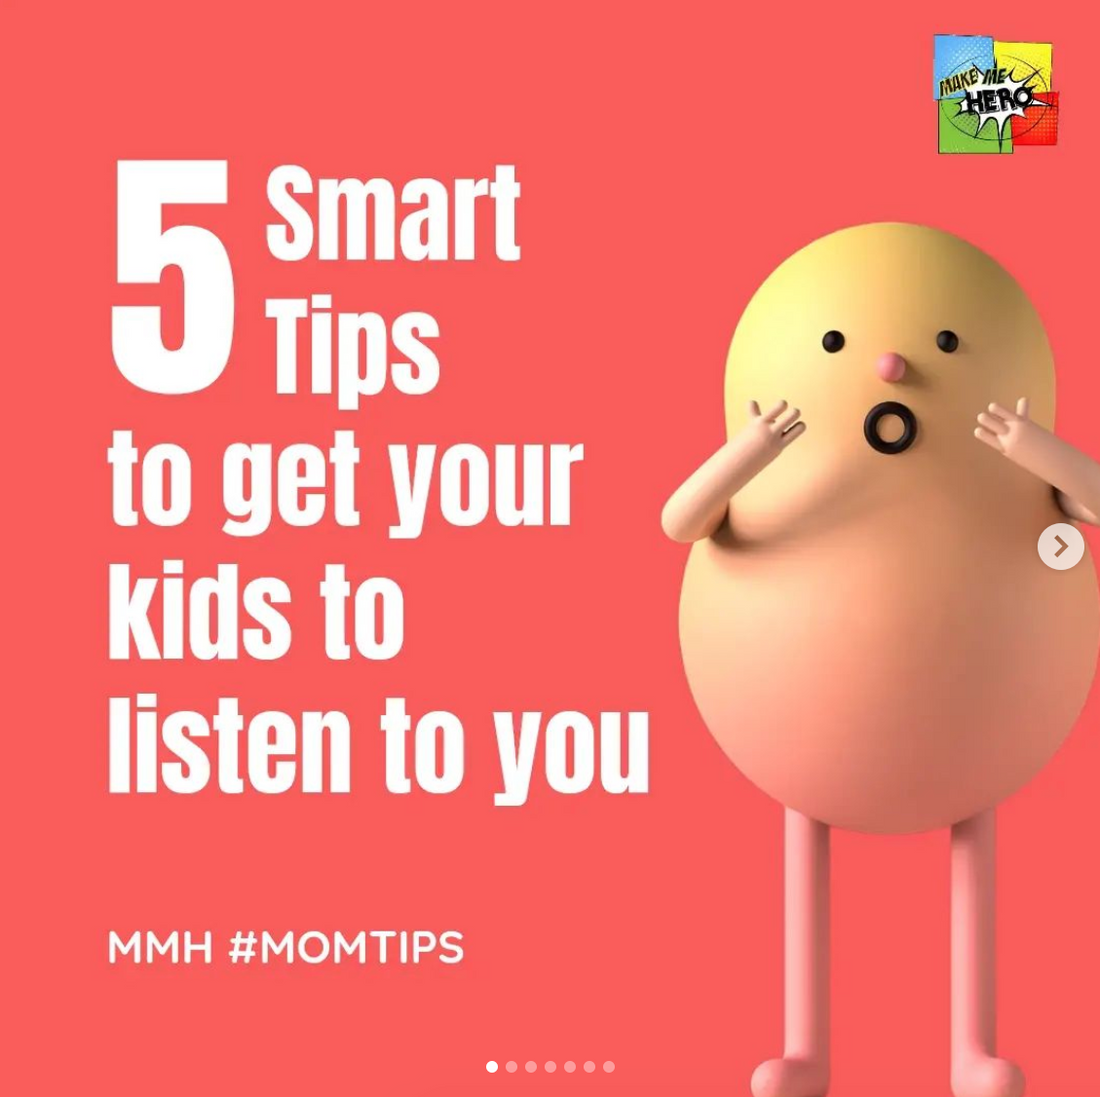 5 SMART TIPS TO GET YOUR KIDS TO LISTEN TO YOU